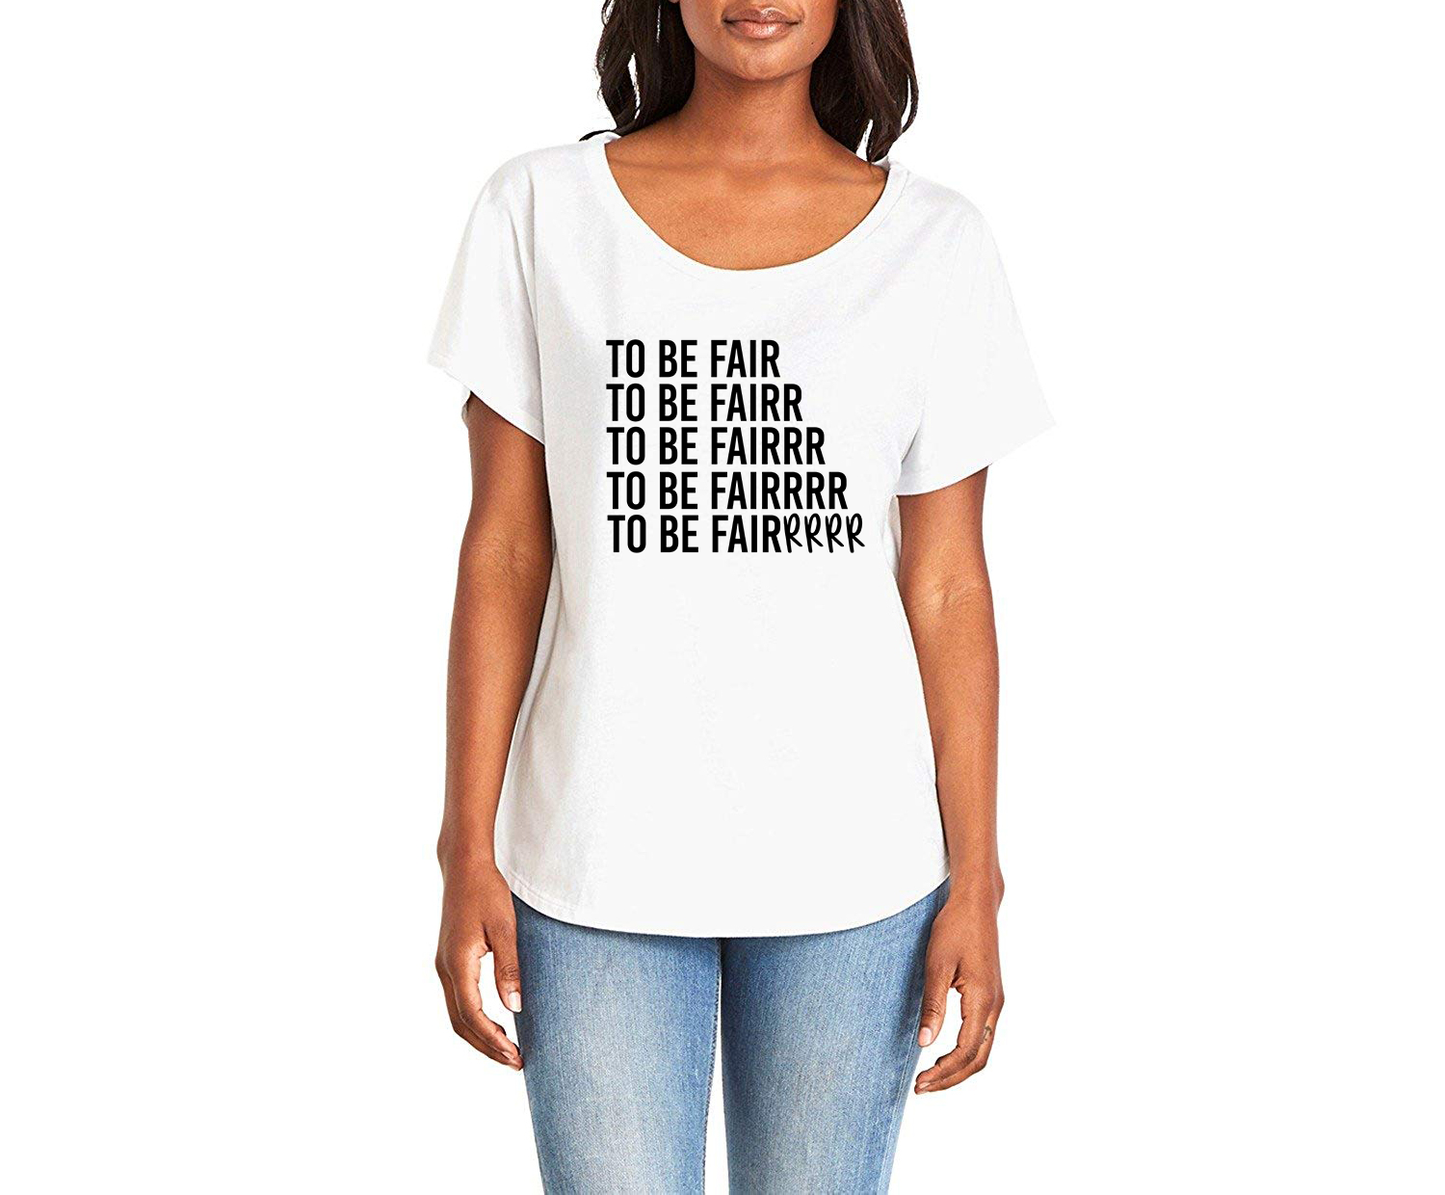 To Be Fair Letter Kenny Ladies Tee Shirt - In Grey & White